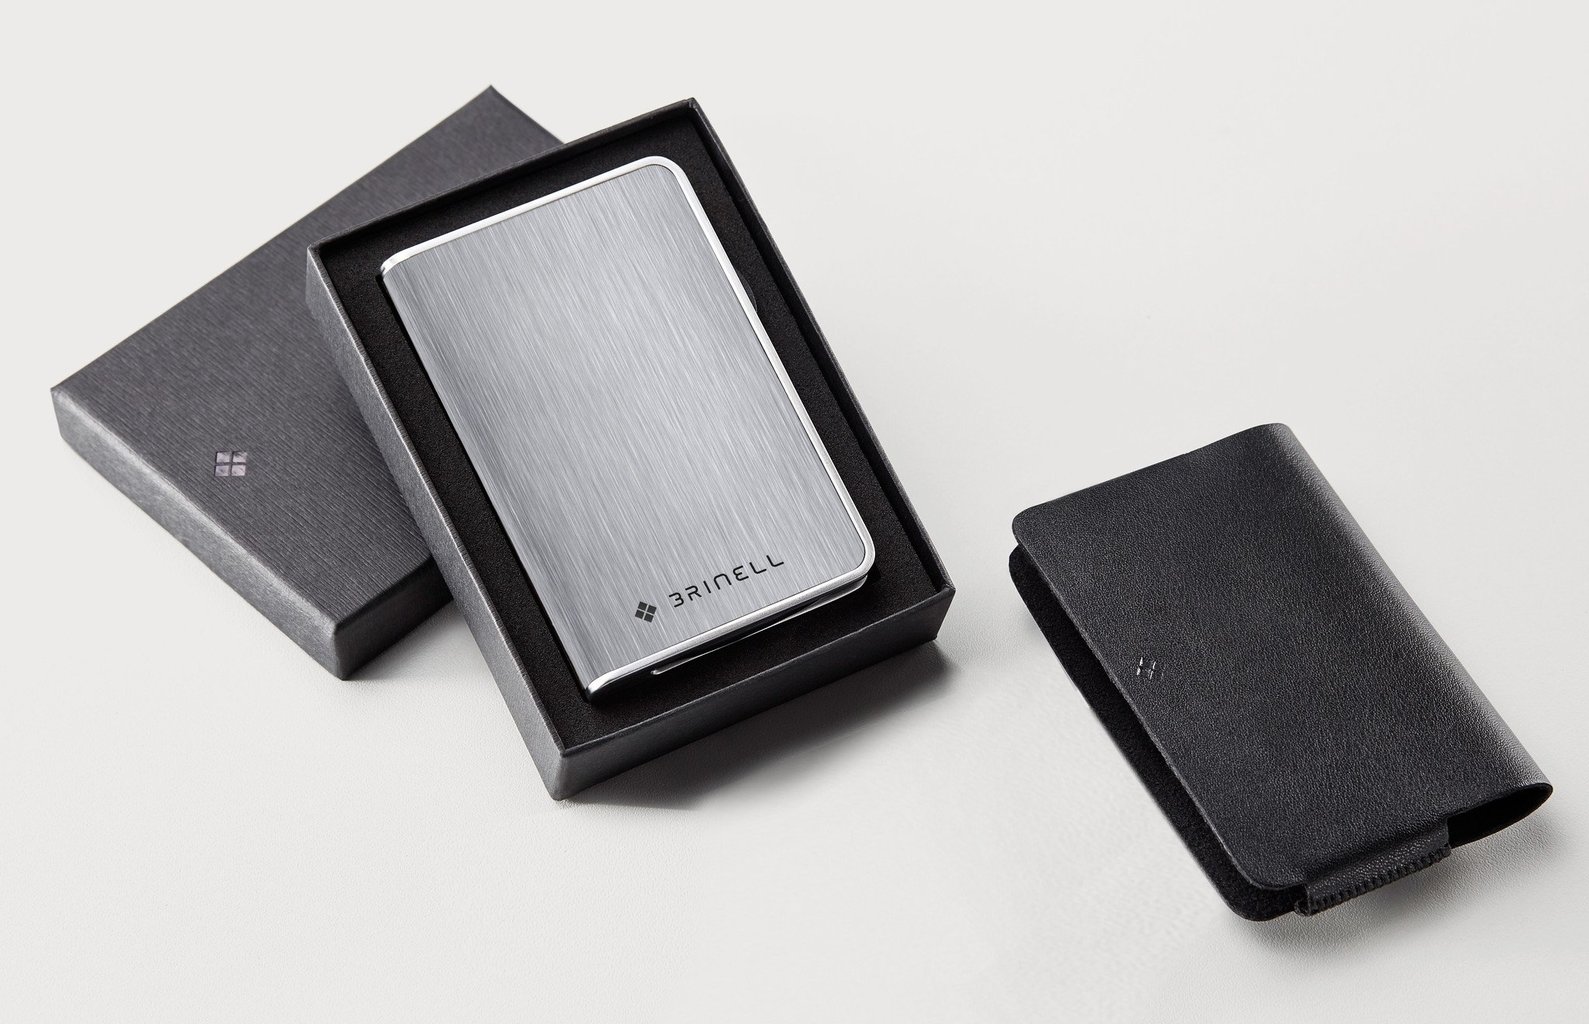 Brinell Drive SSD portable SSD review and specs, best buy portable ssd drive, box contents